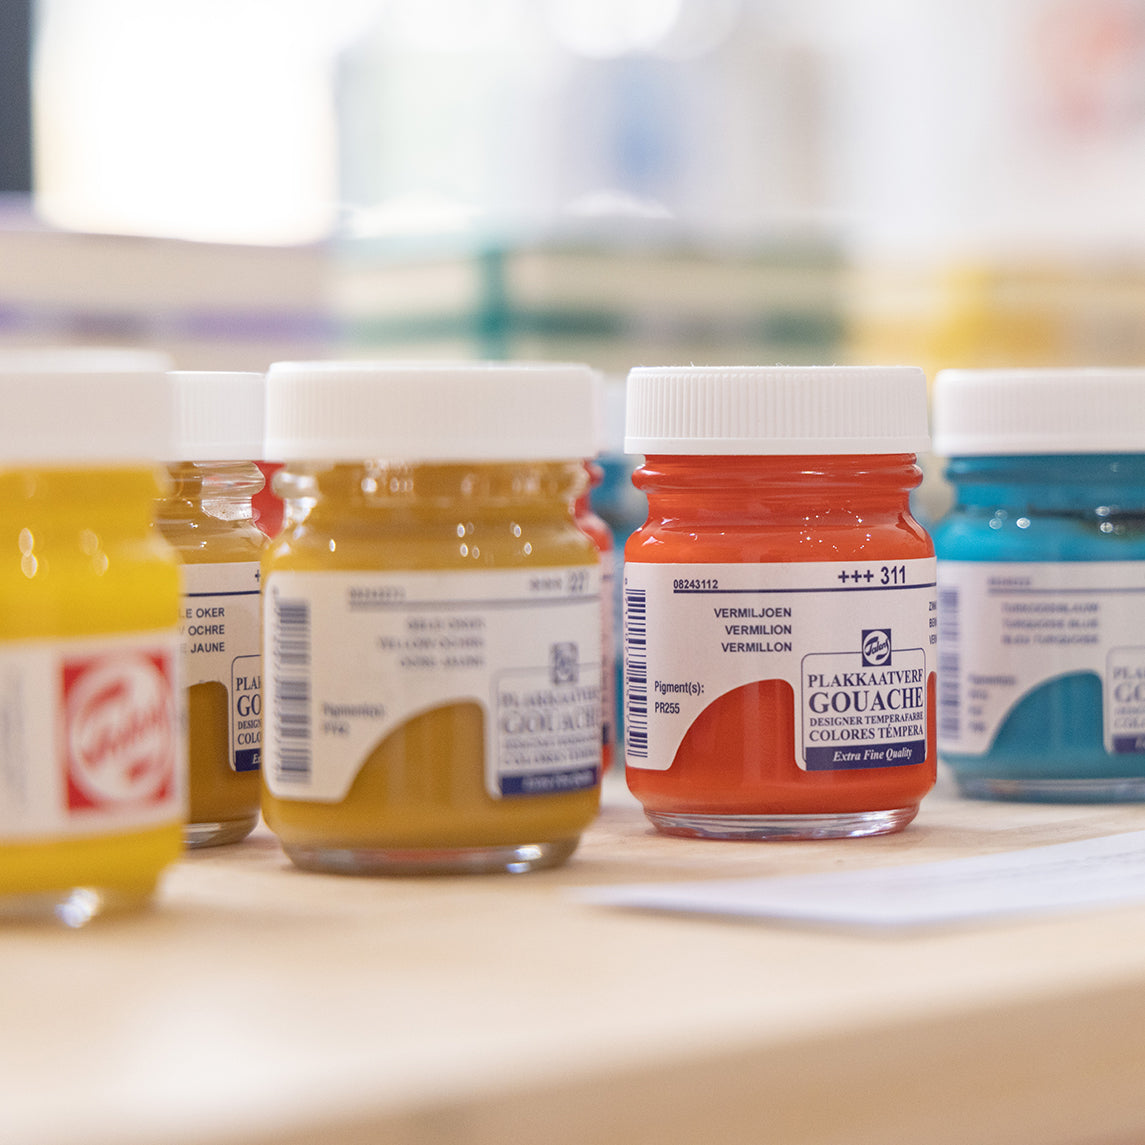 A row of Royal Talens gouache paint jars, including Yellow, Yellow Ochre, Vermillion and Turquoise Blue.